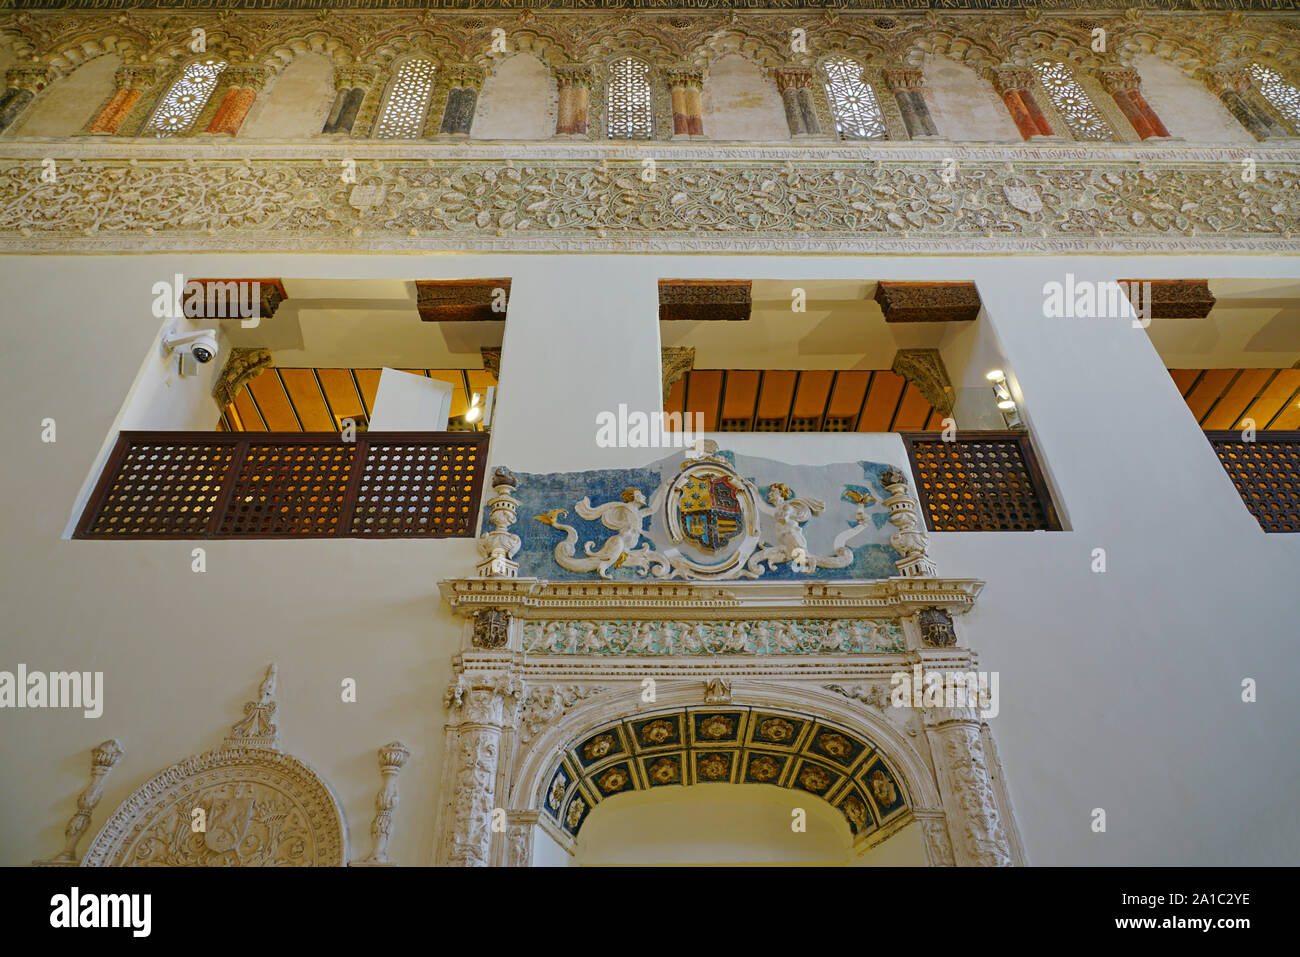 TOLEDO, SPAIN -22 JUN 2019- View of the landmark Synagogue of El Transito, now a Sephardic museum located in Toledo, Spain. Stock Photo